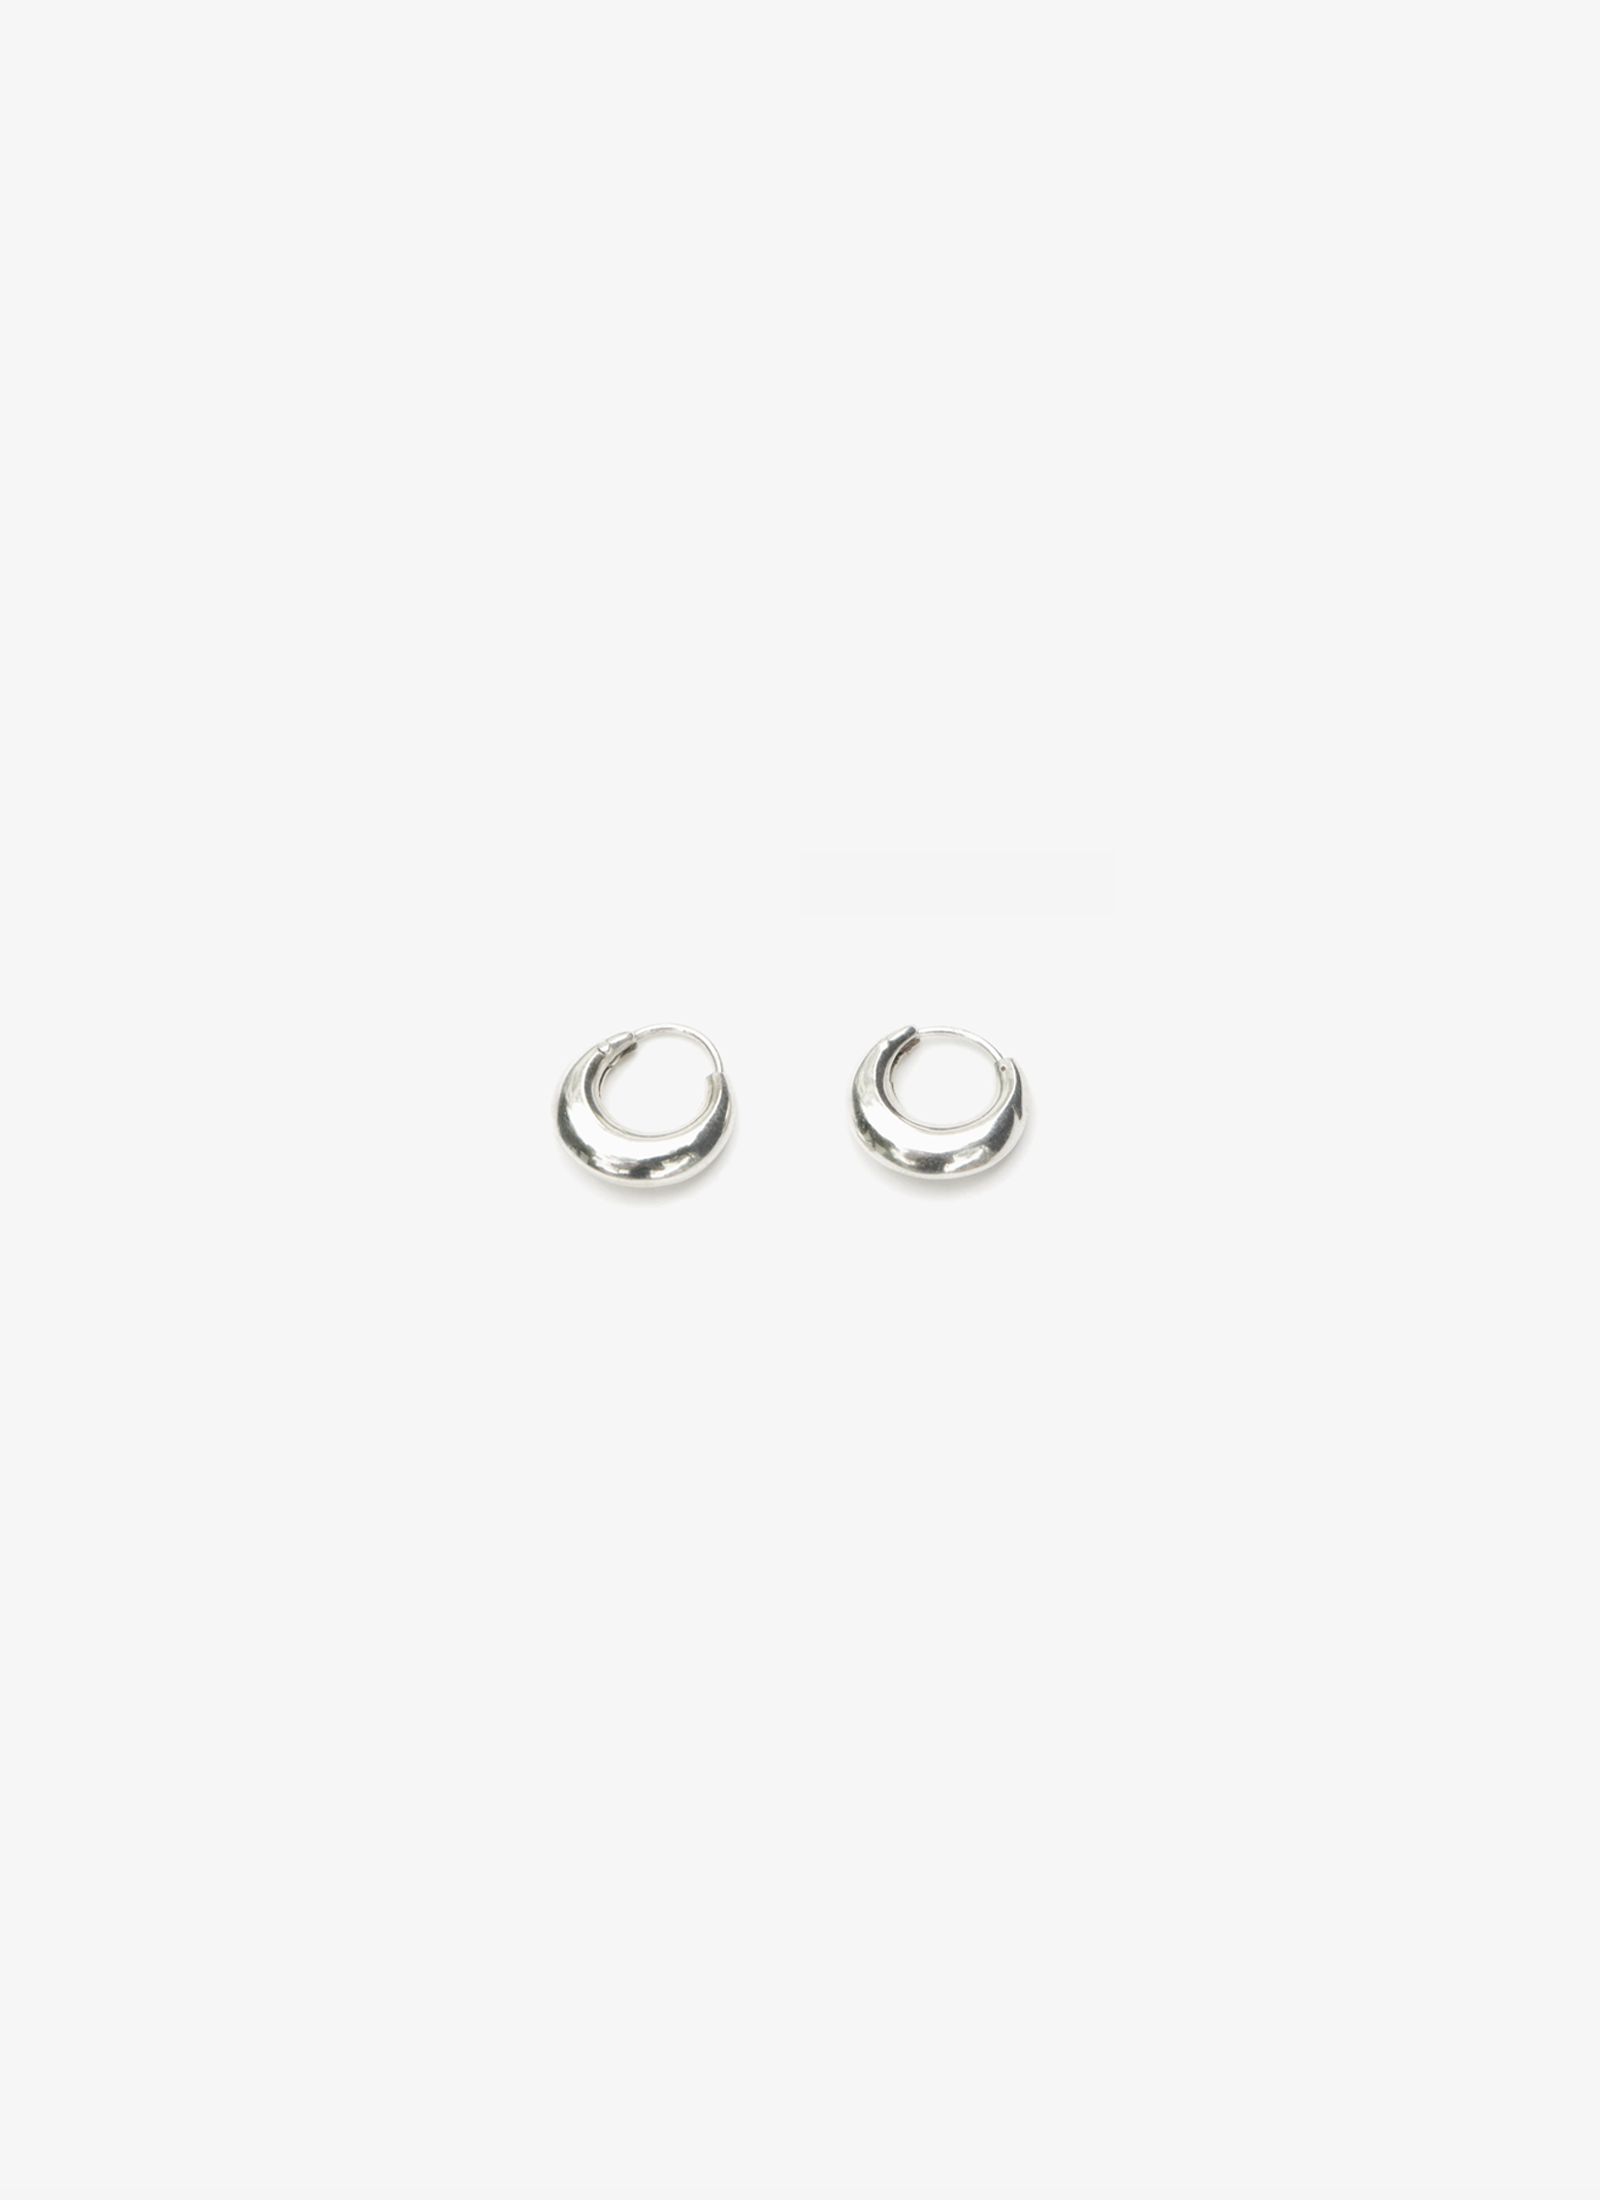 Tiny Essential Hoops